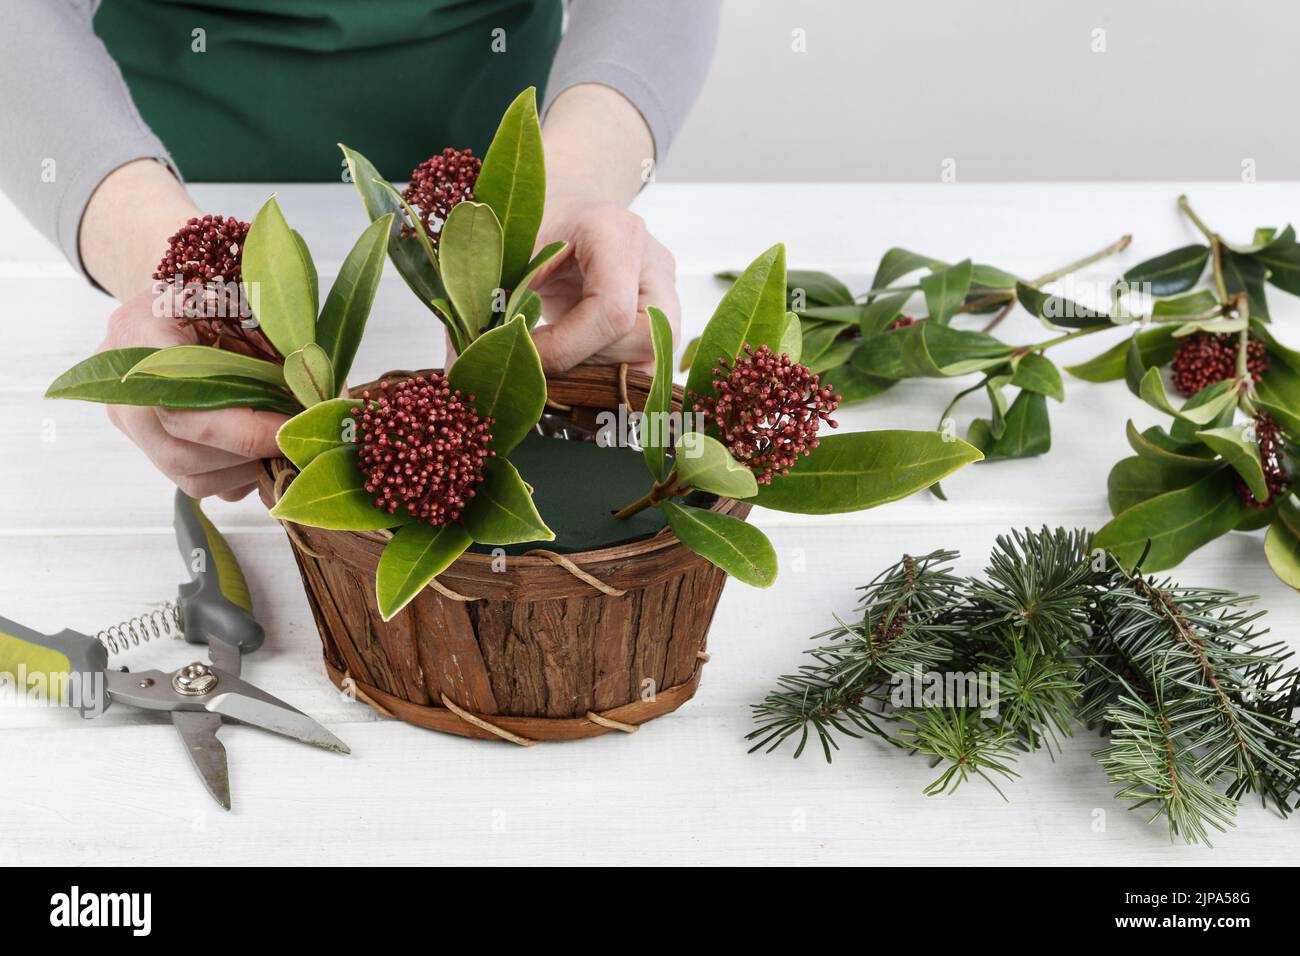 Florist at work: woman shows how to make floral arrangement with  skimmia (Skimmia japonica), an evergreen shrub and fir twigs. Step by step, tutorial Stock Photo